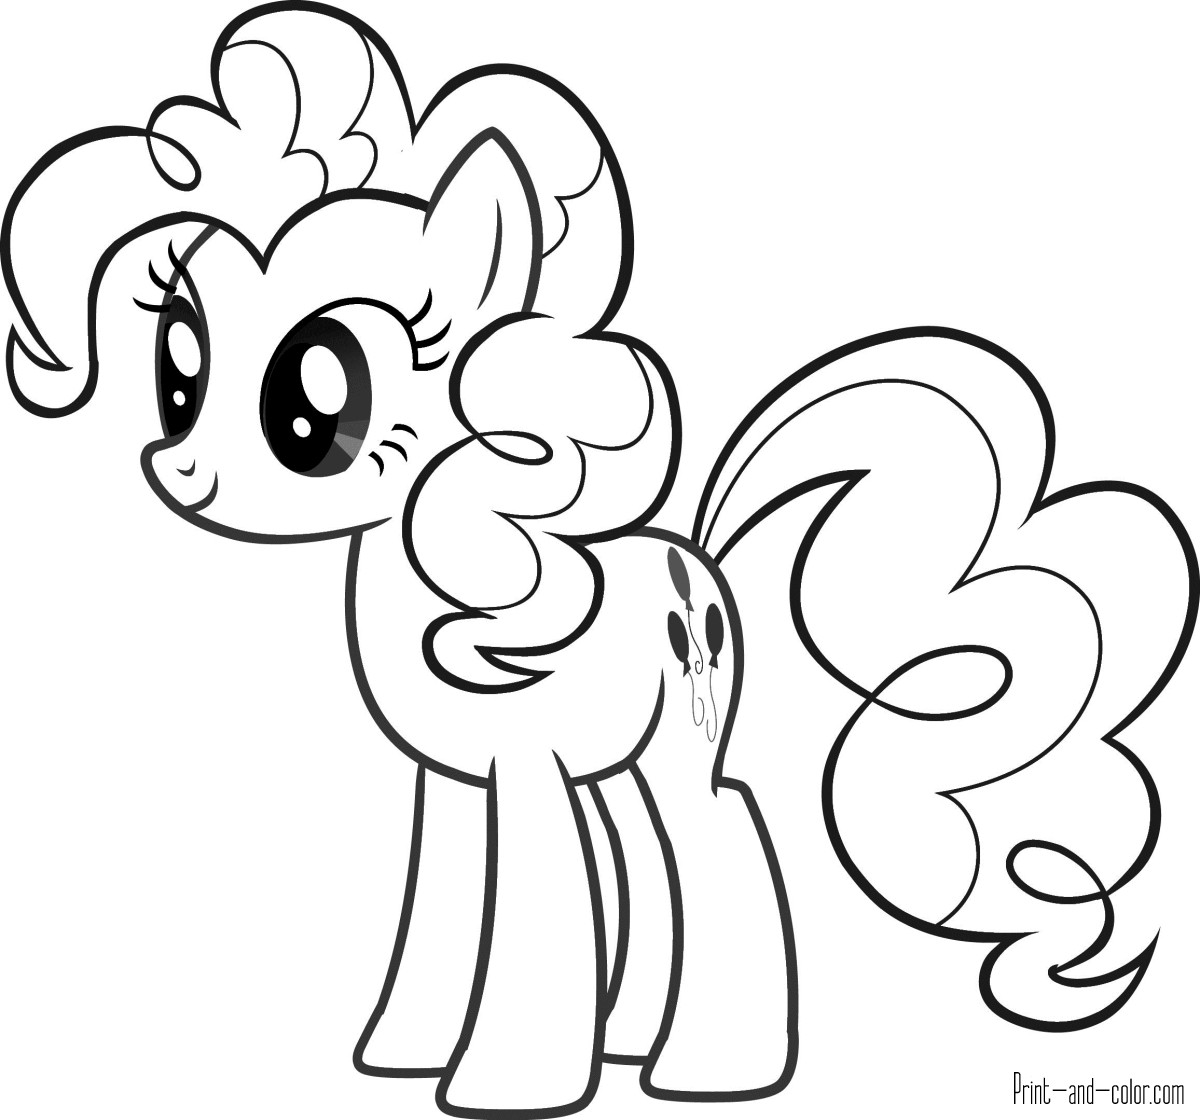 Mlp Coloring Book
 My Little Pony coloring pages